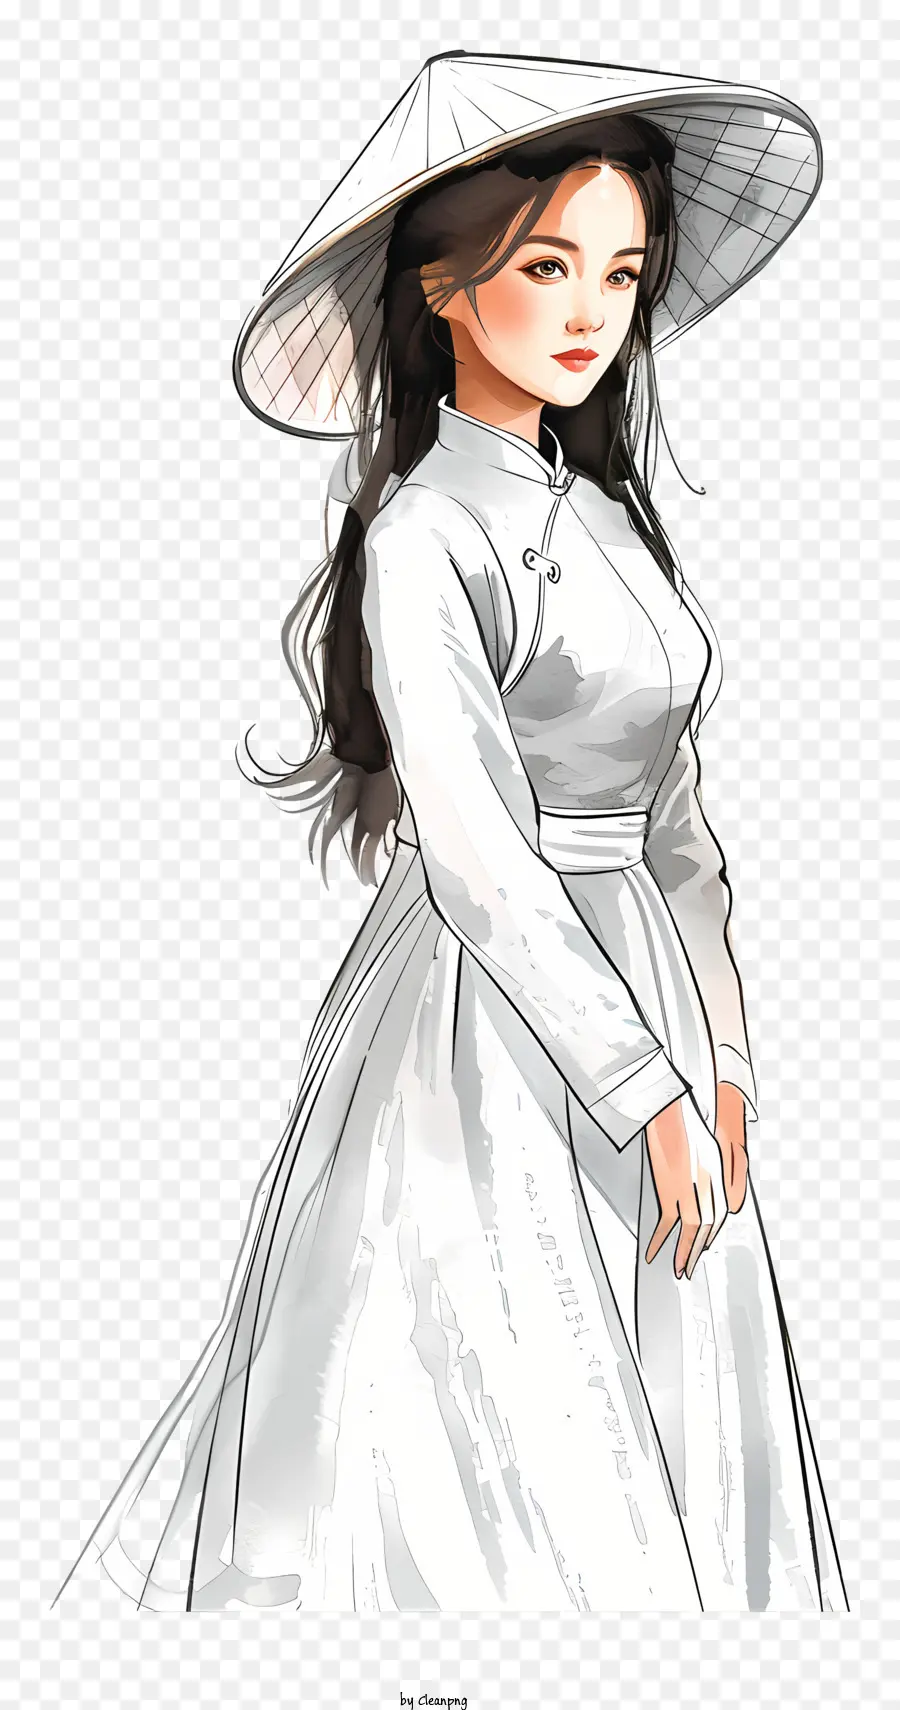 ao dai white dress wide-brimmed hat long black hair smiling